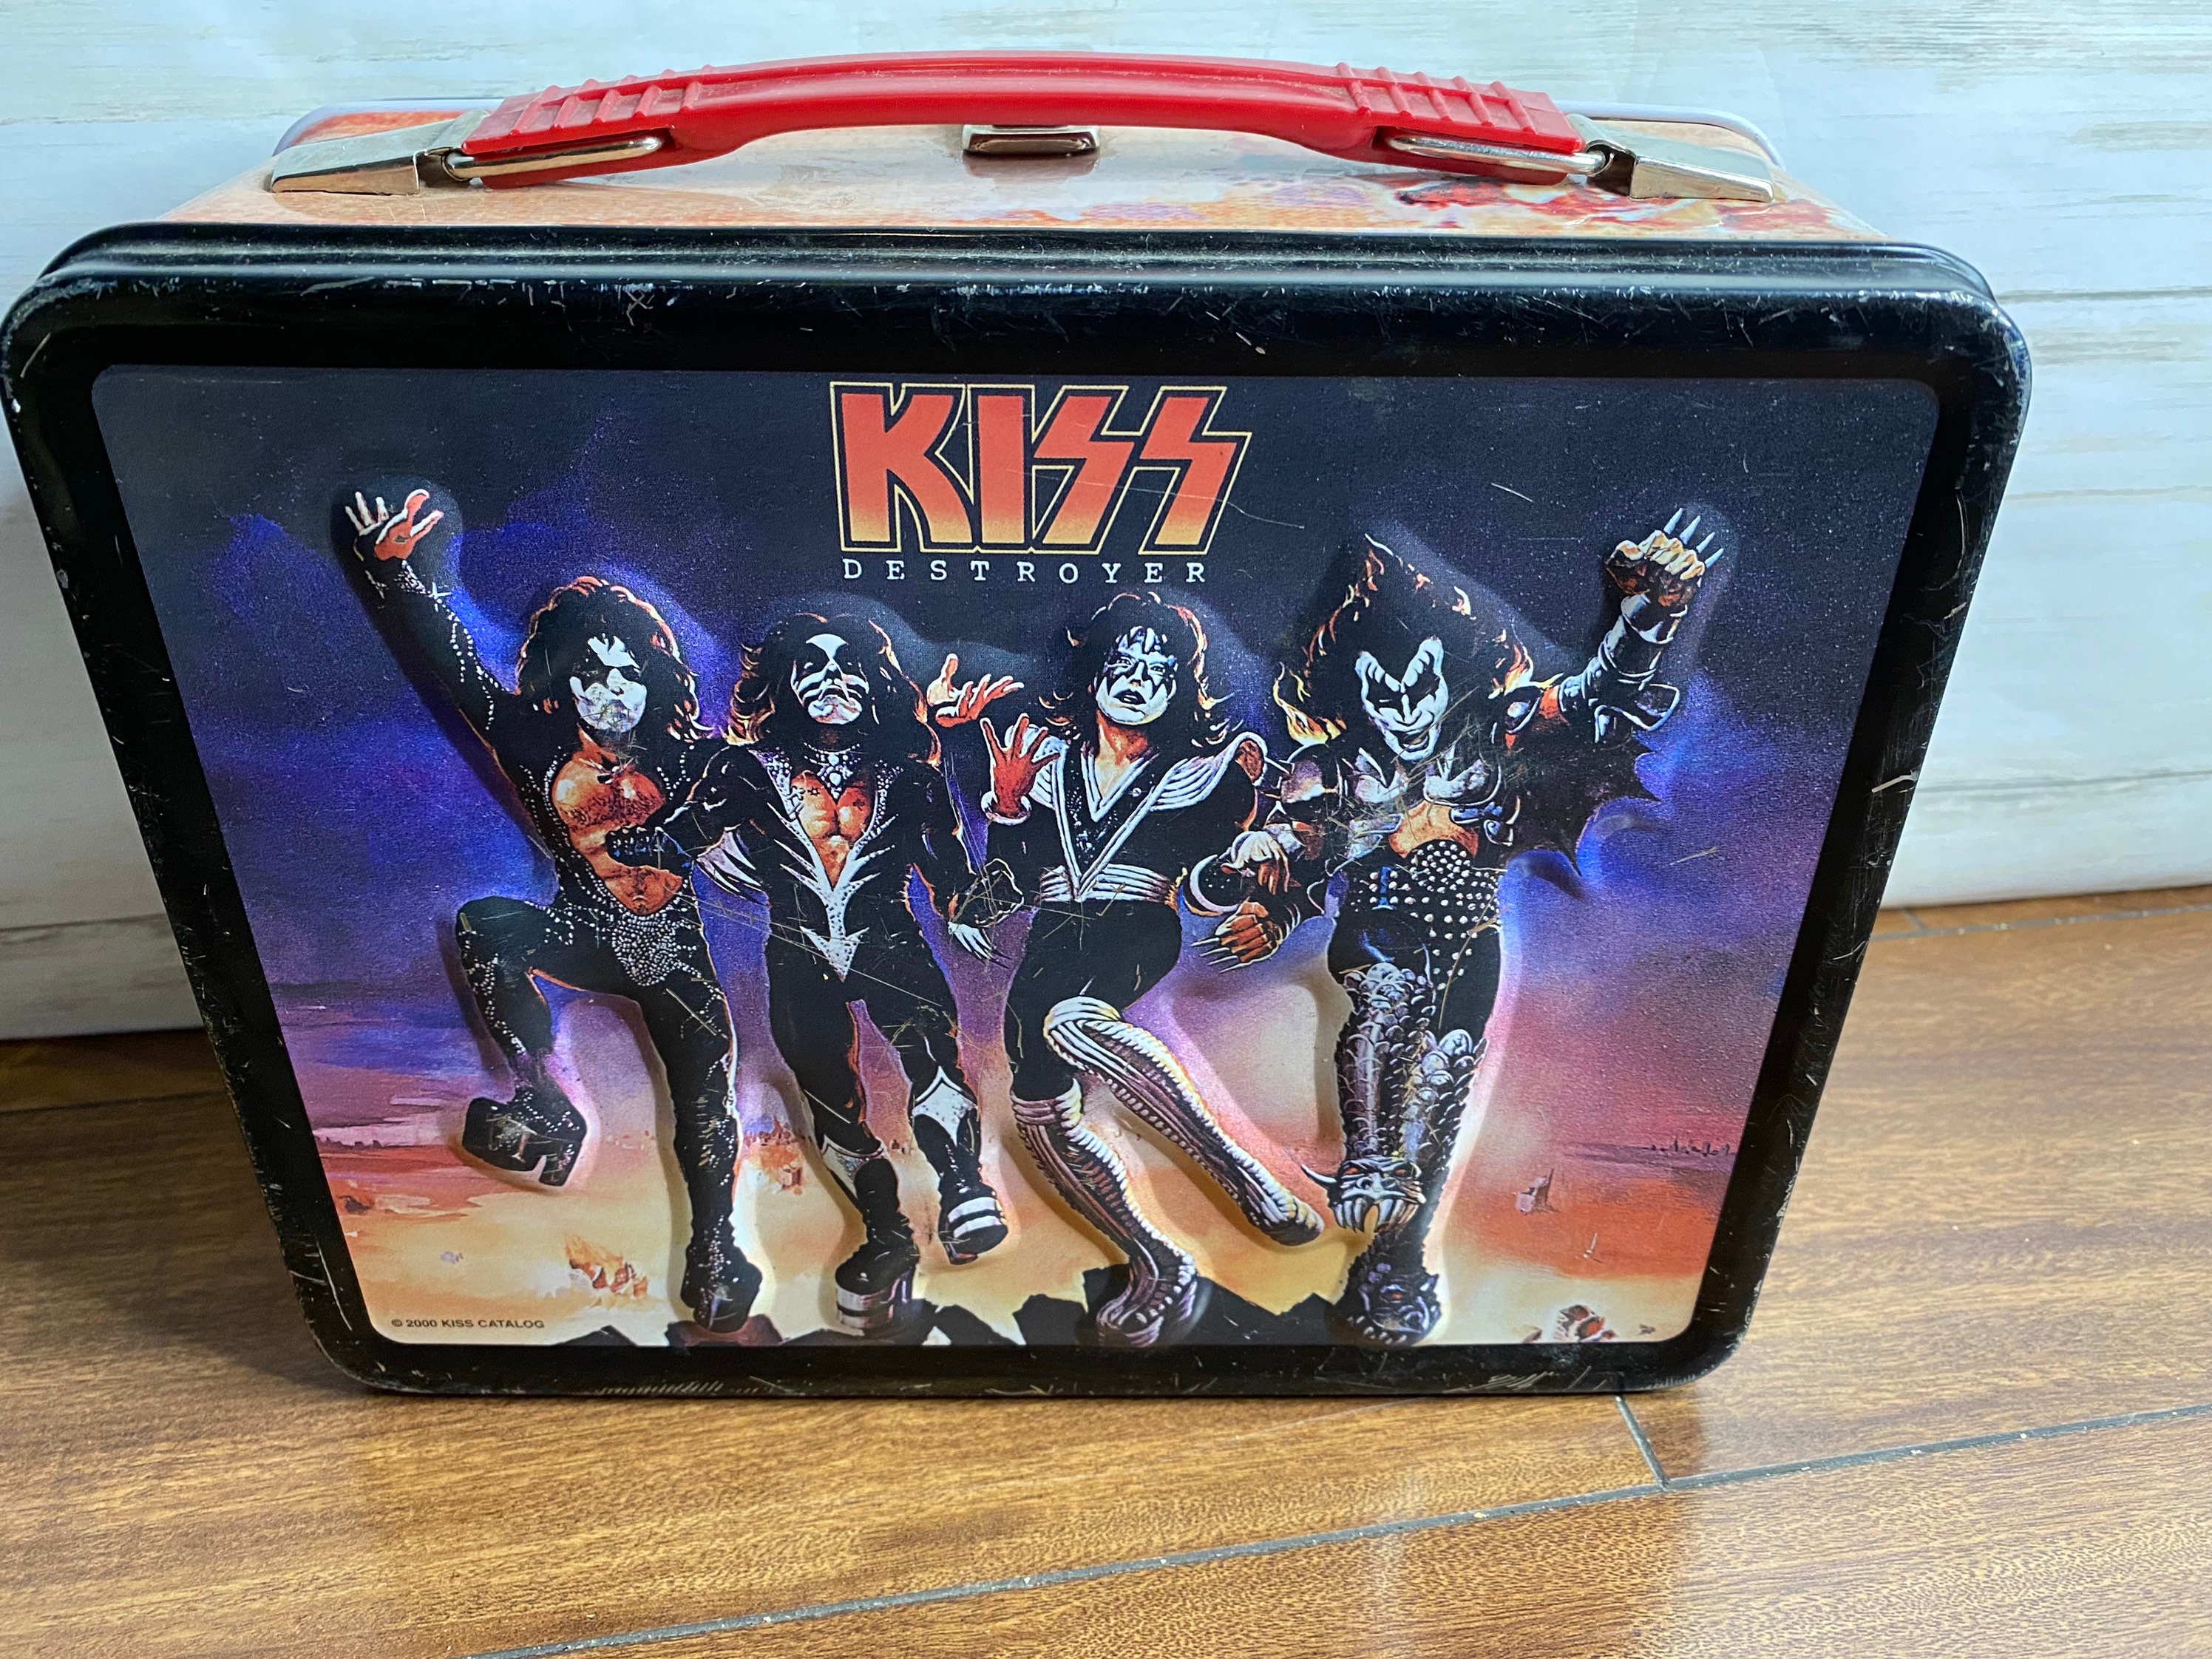 1977 Kiss Lunch Box Lunch Box Thermos Vintage Lunch Boxes Vlrengbr 